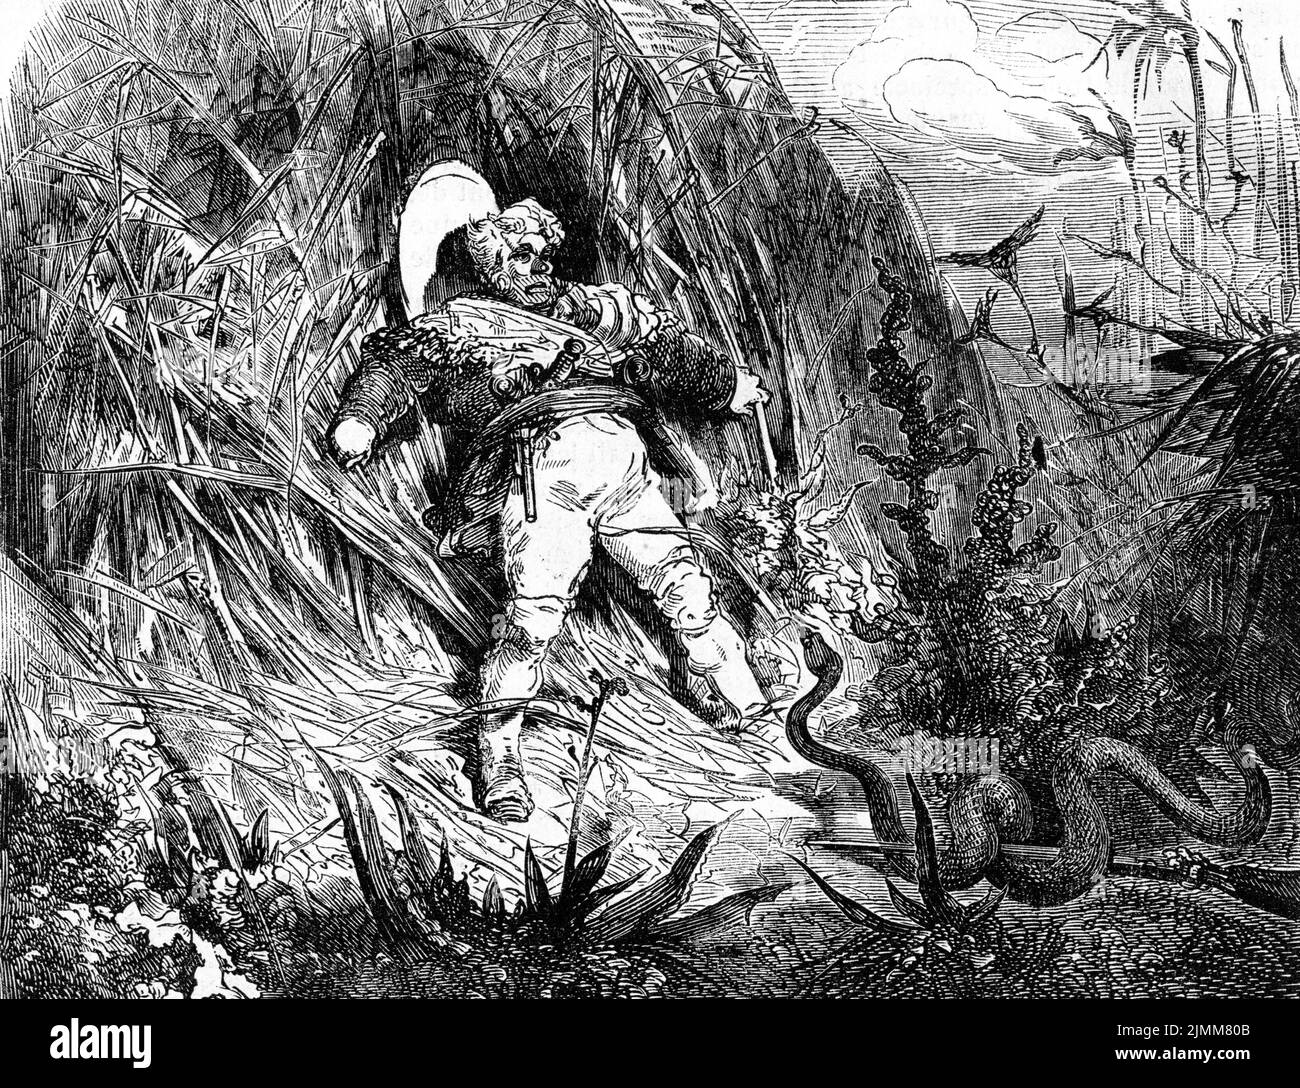 Engraving of a man being attacked by a poisonous snake Stock Photo